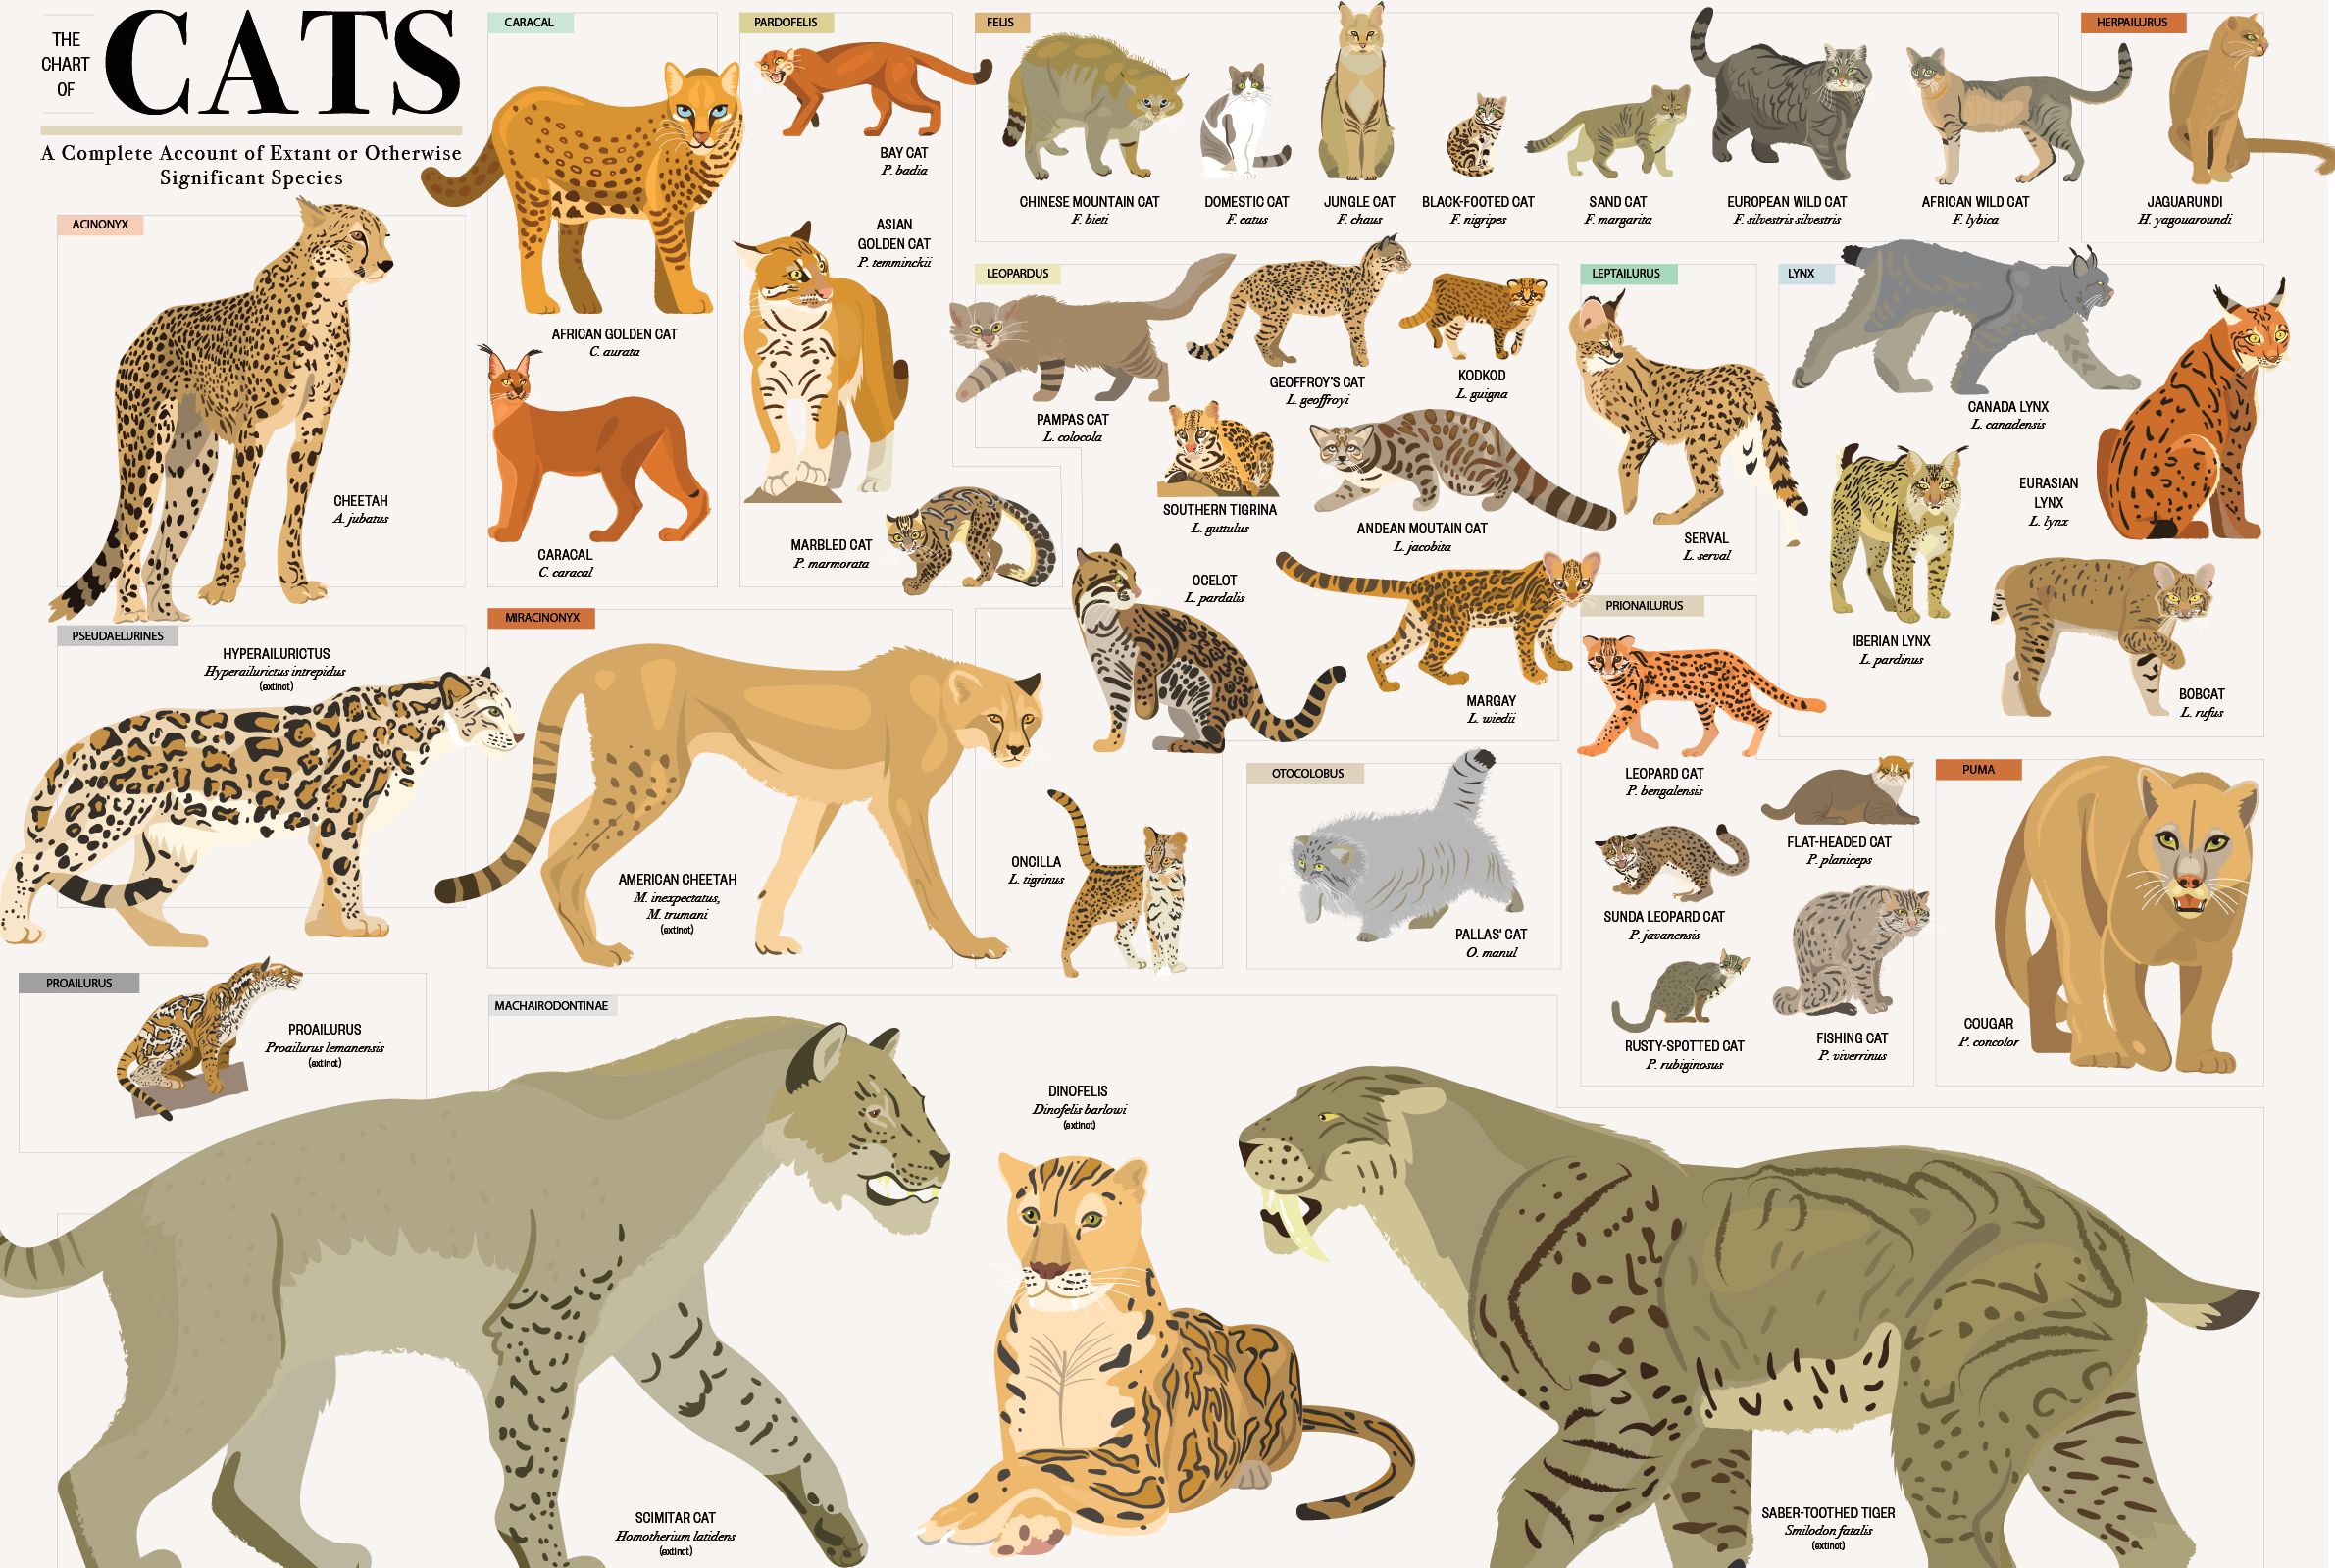 This Wall Chart Shows Every Species in 